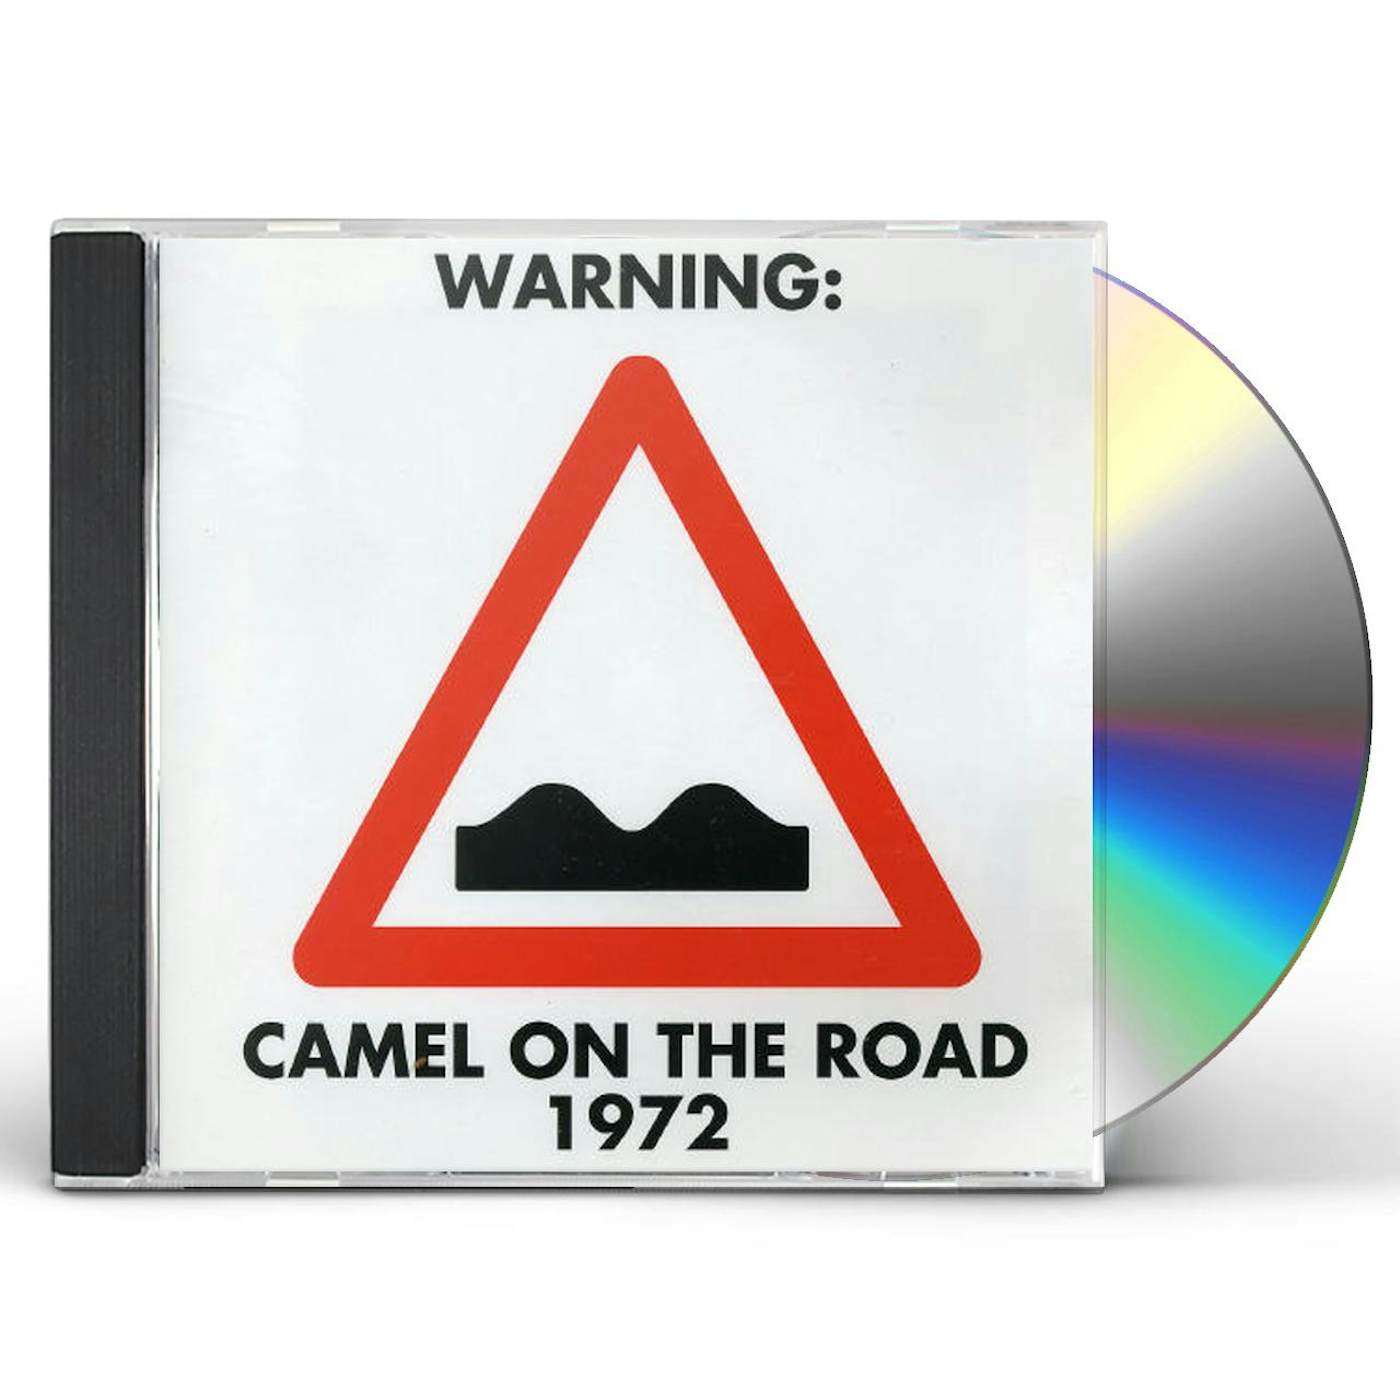 CAMEL ON THE ROAD 1972 CD